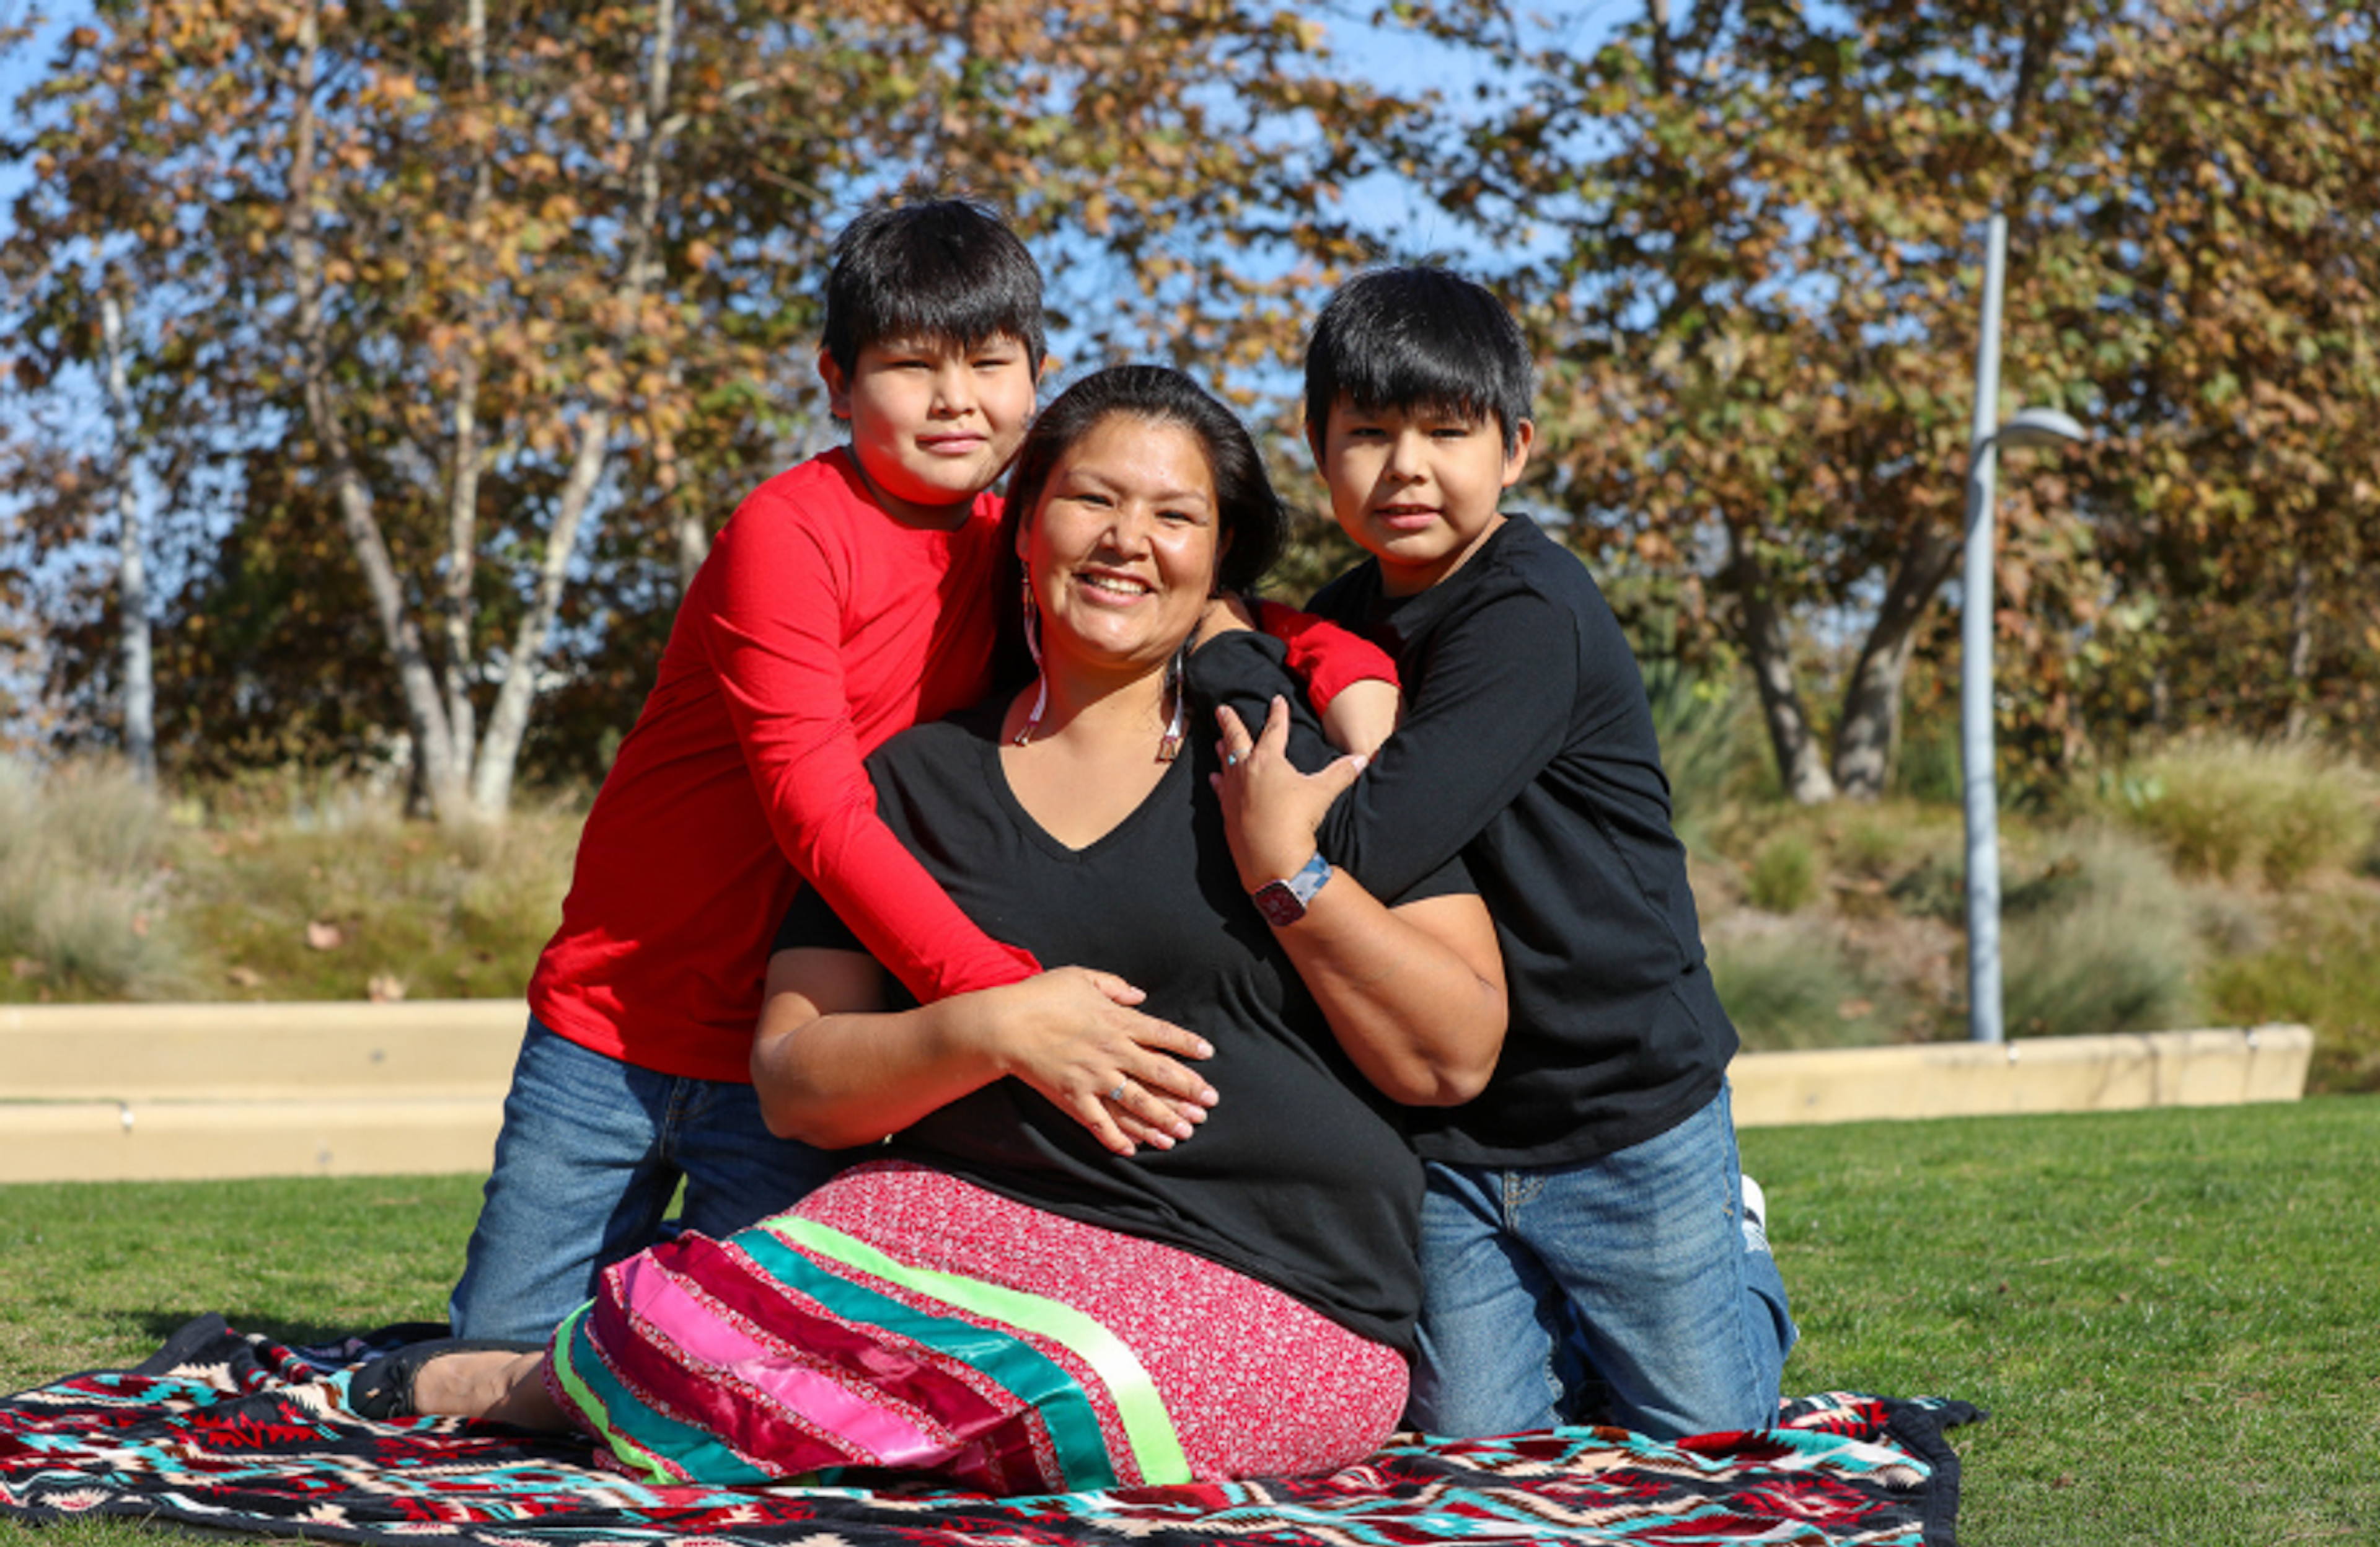 Mom With Two Sons Sitting on Blanket on the Grass.